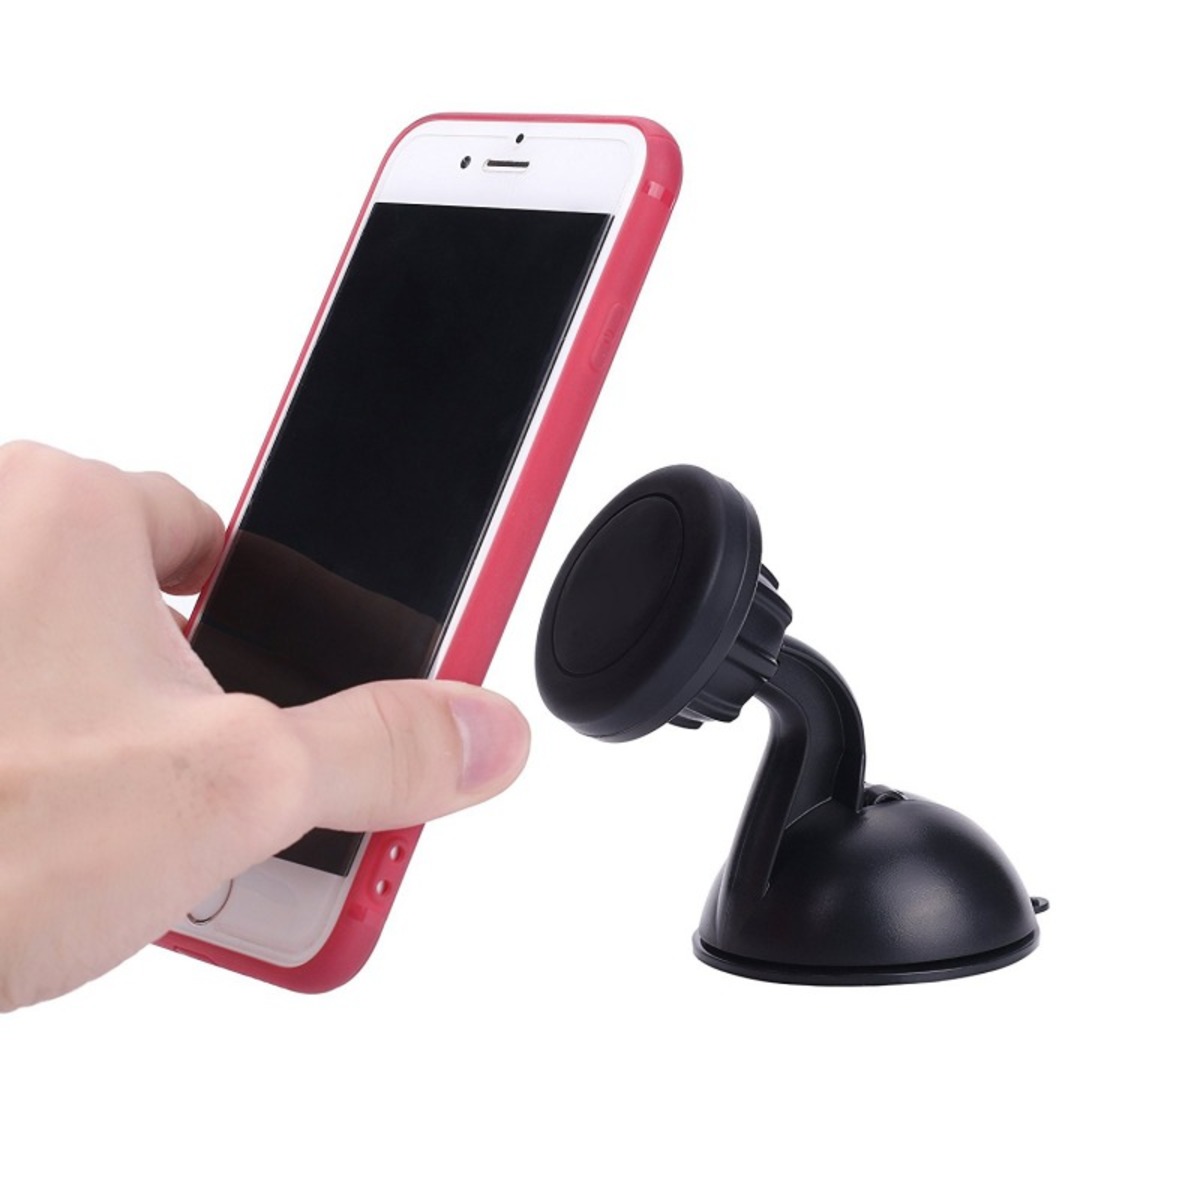 Iends Universal Magnetic Car Mount Dashboard Stand Mobile Phone Holder HO2285